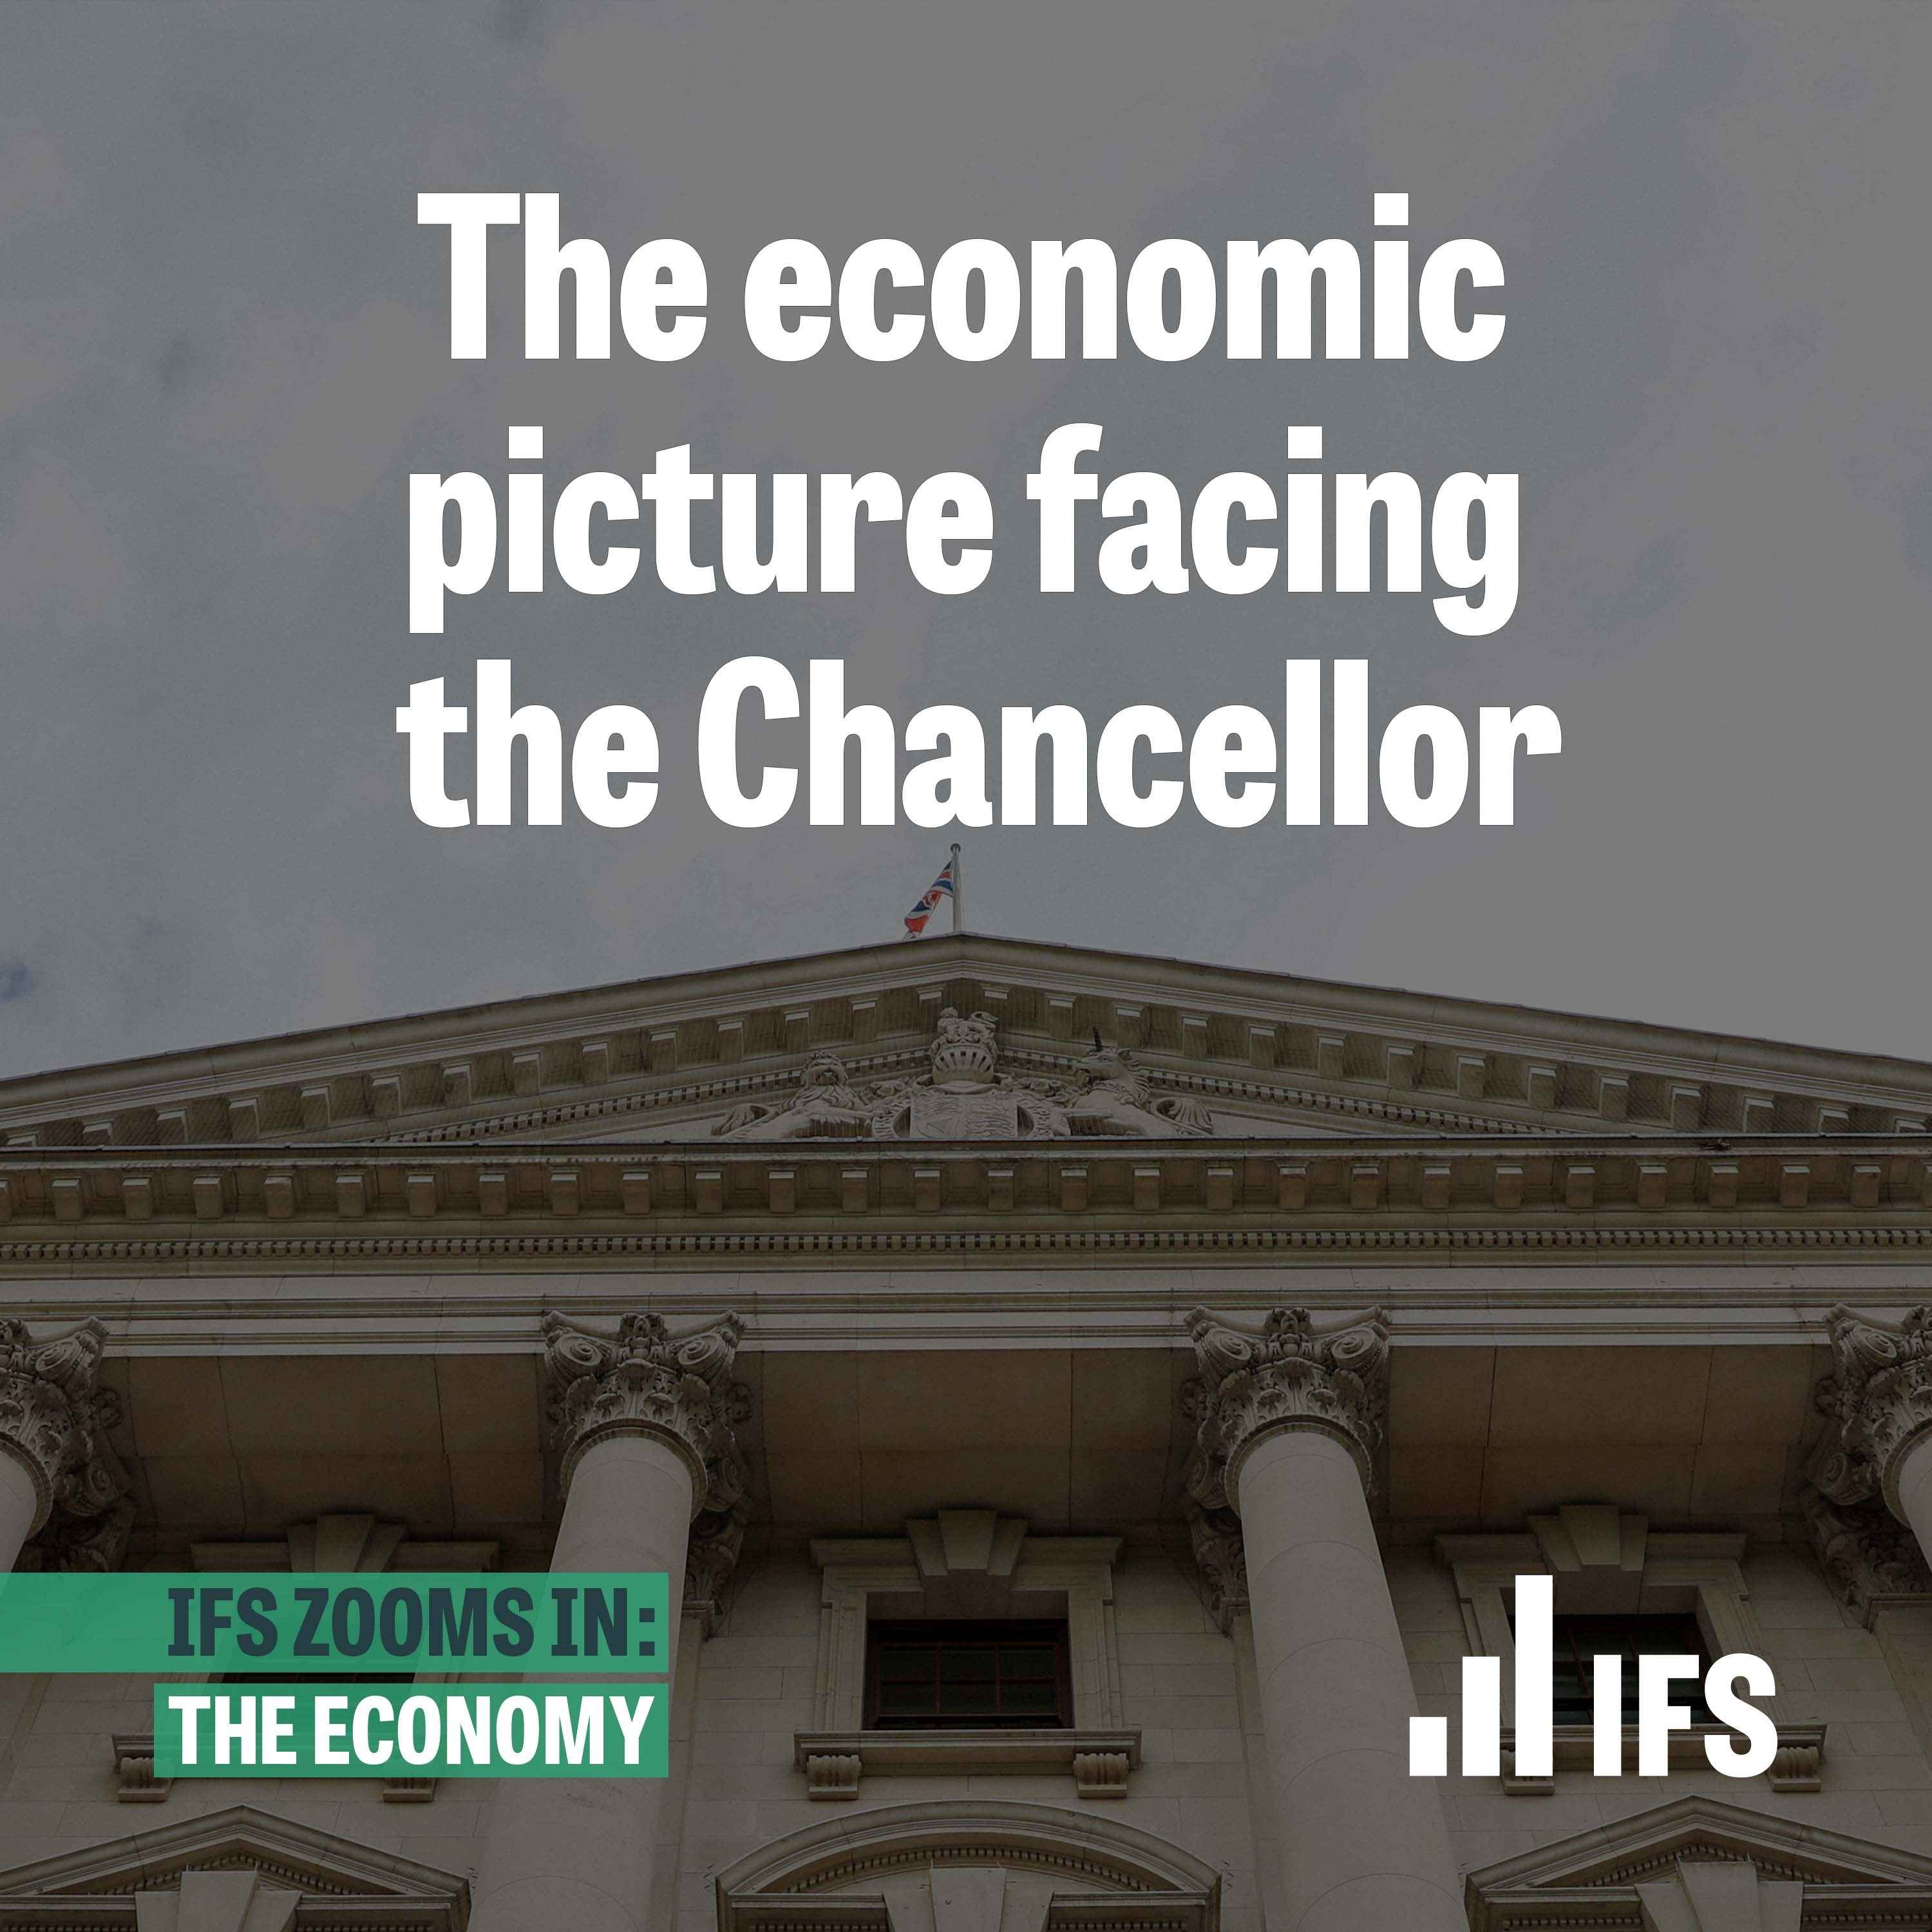 The economic picture facing the Chancellor